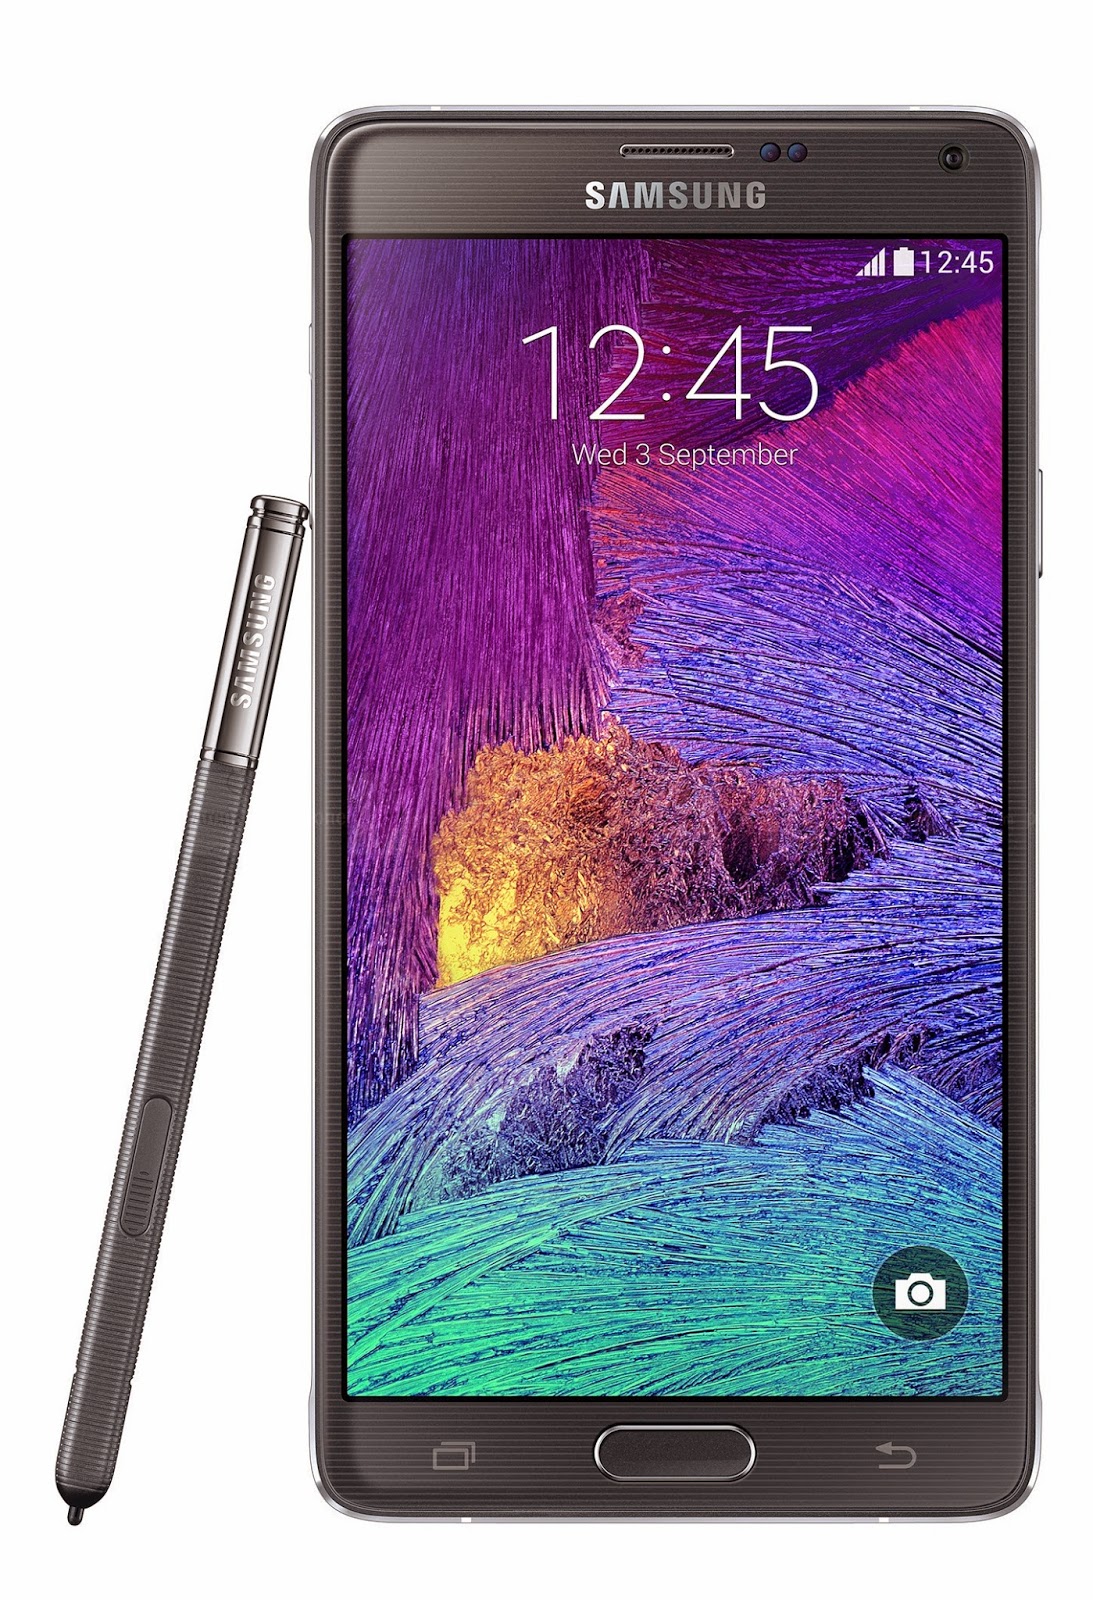 Samsung Galaxy Note 4 Price and Full Specification